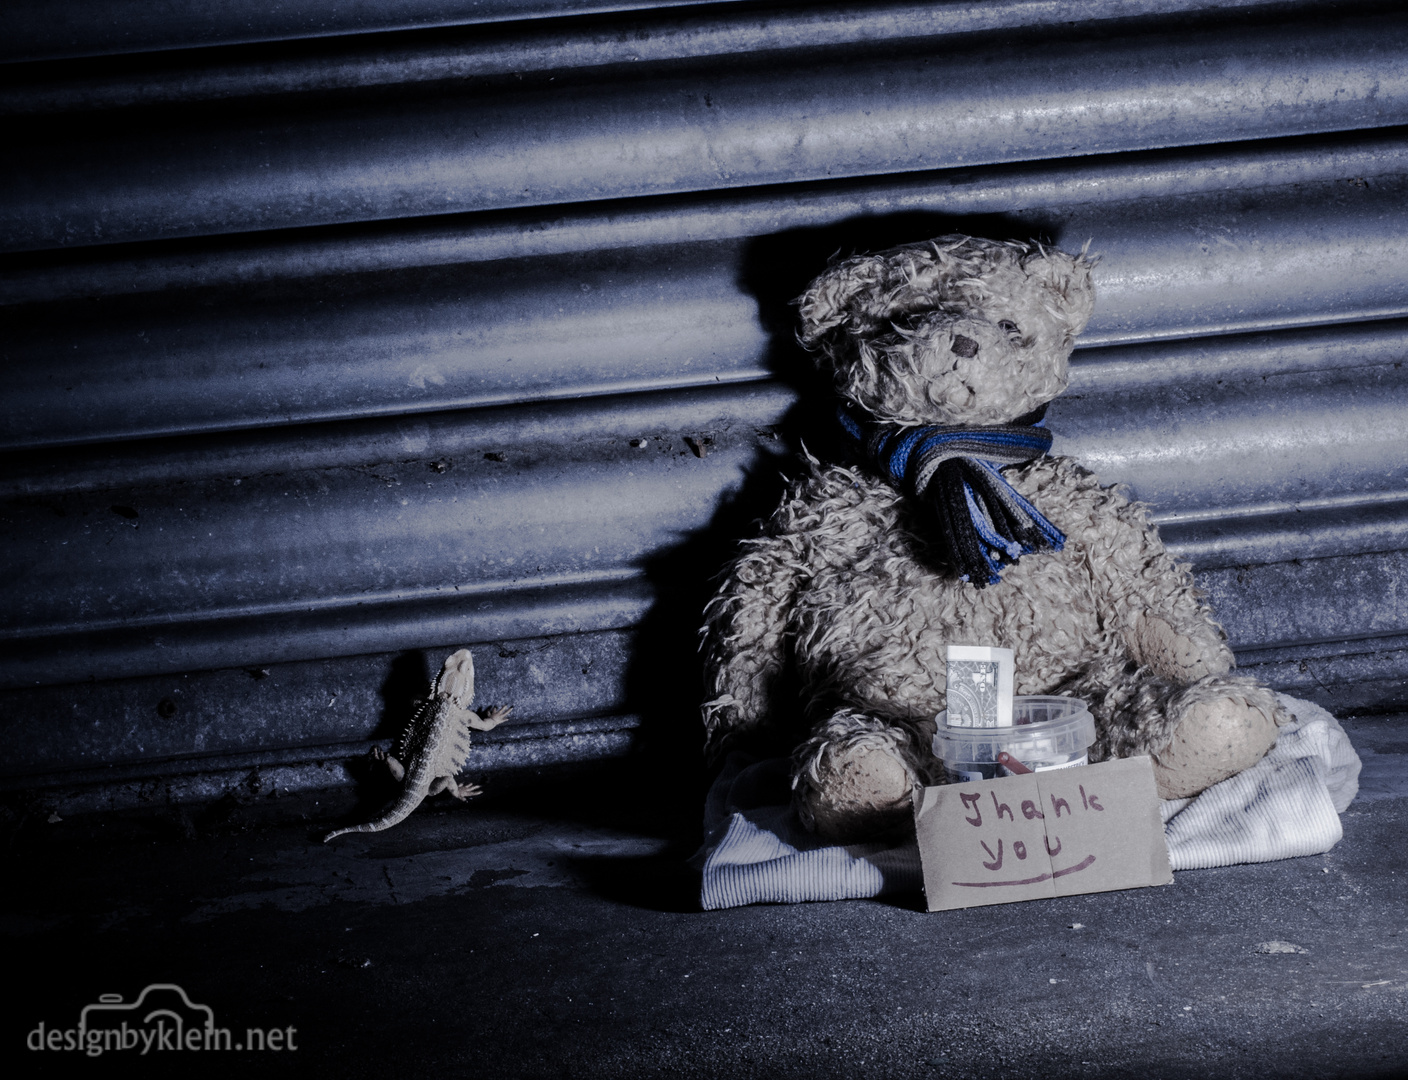 hard times even for Teddy´s